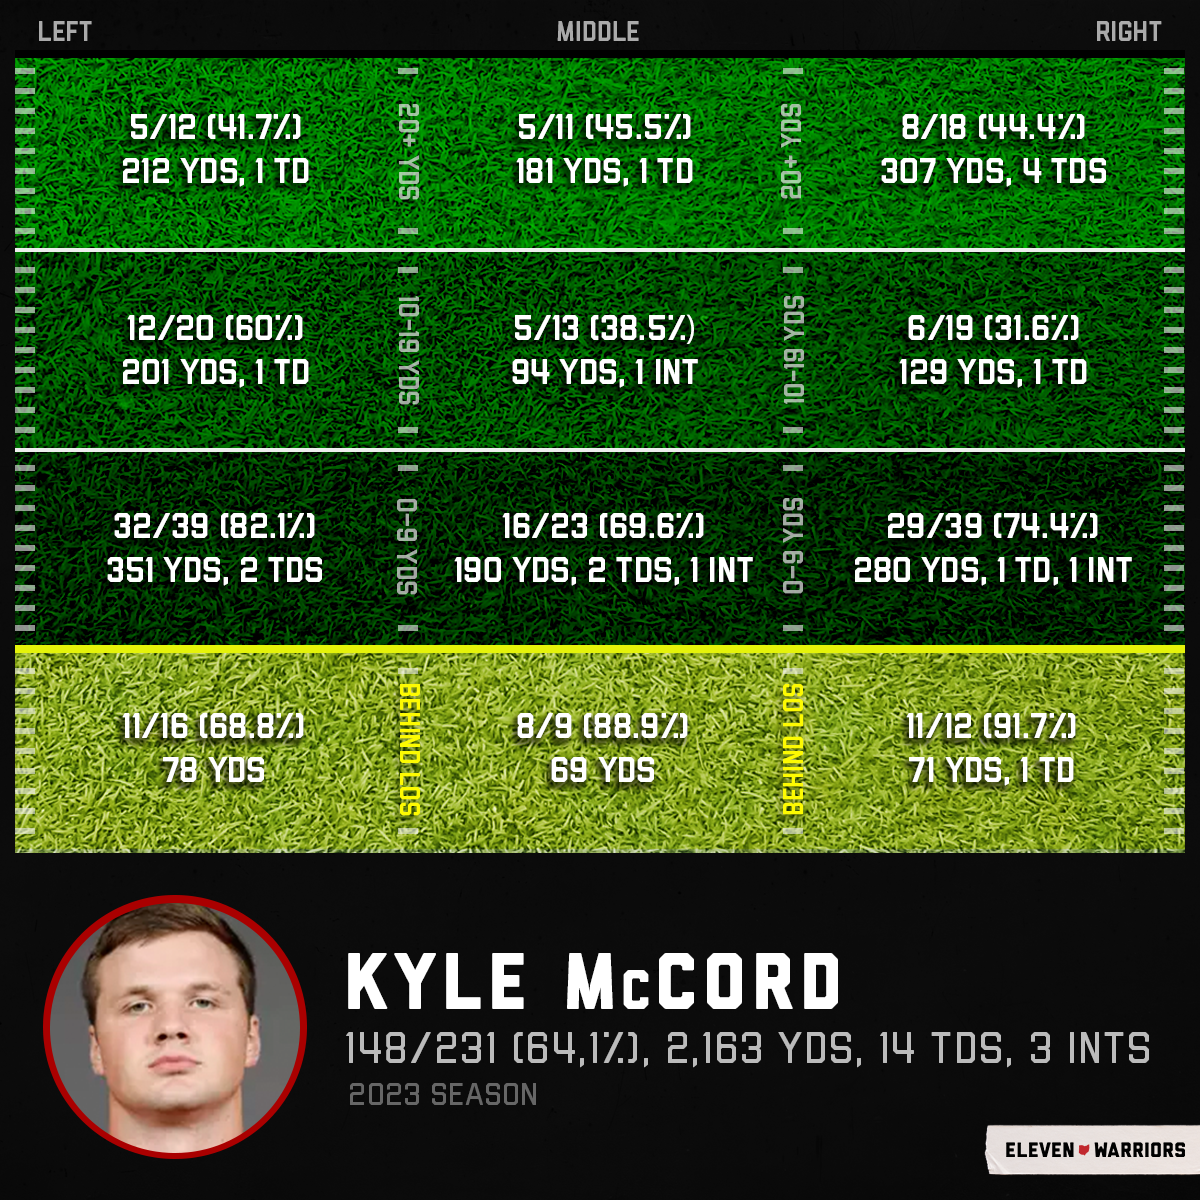 Kyle McCord's passing chart at Wisconsin